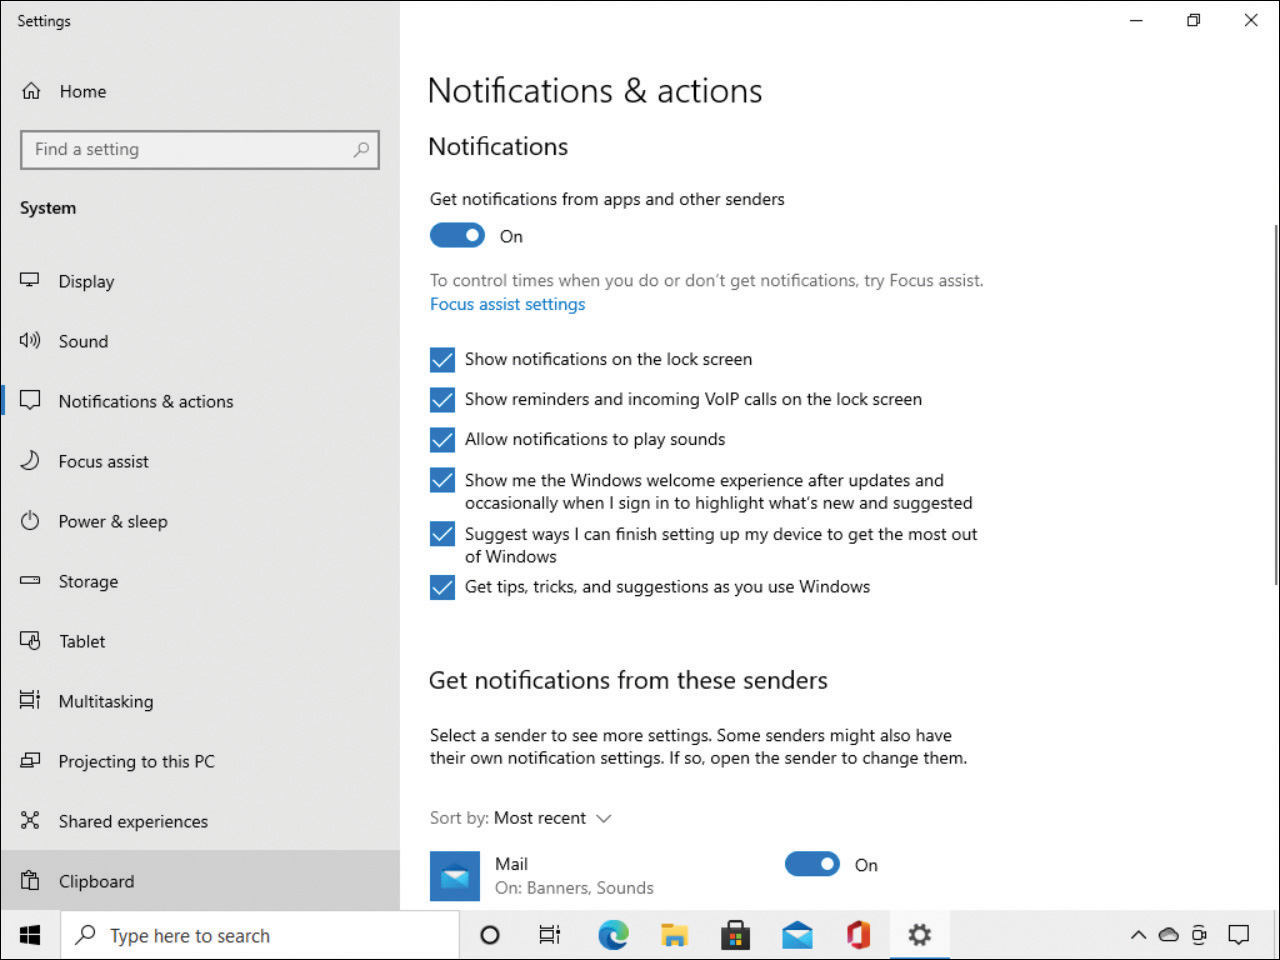 This screenshot shows the Notifications and Actions section of the Settings App. On the right side of the screen the options for configuring Notifications are listed. The Get Notifications option is set to On. Underneath checkboxes for Show Notifications on the Local Screen, Show reminders, Allow Notifications to Play Sound, Show Me the Windows Welcome Experience, Suggest Ways I can Finish Setting up my Device to Get the Most out of Windows and Get Tips and Tricks are all selected. 